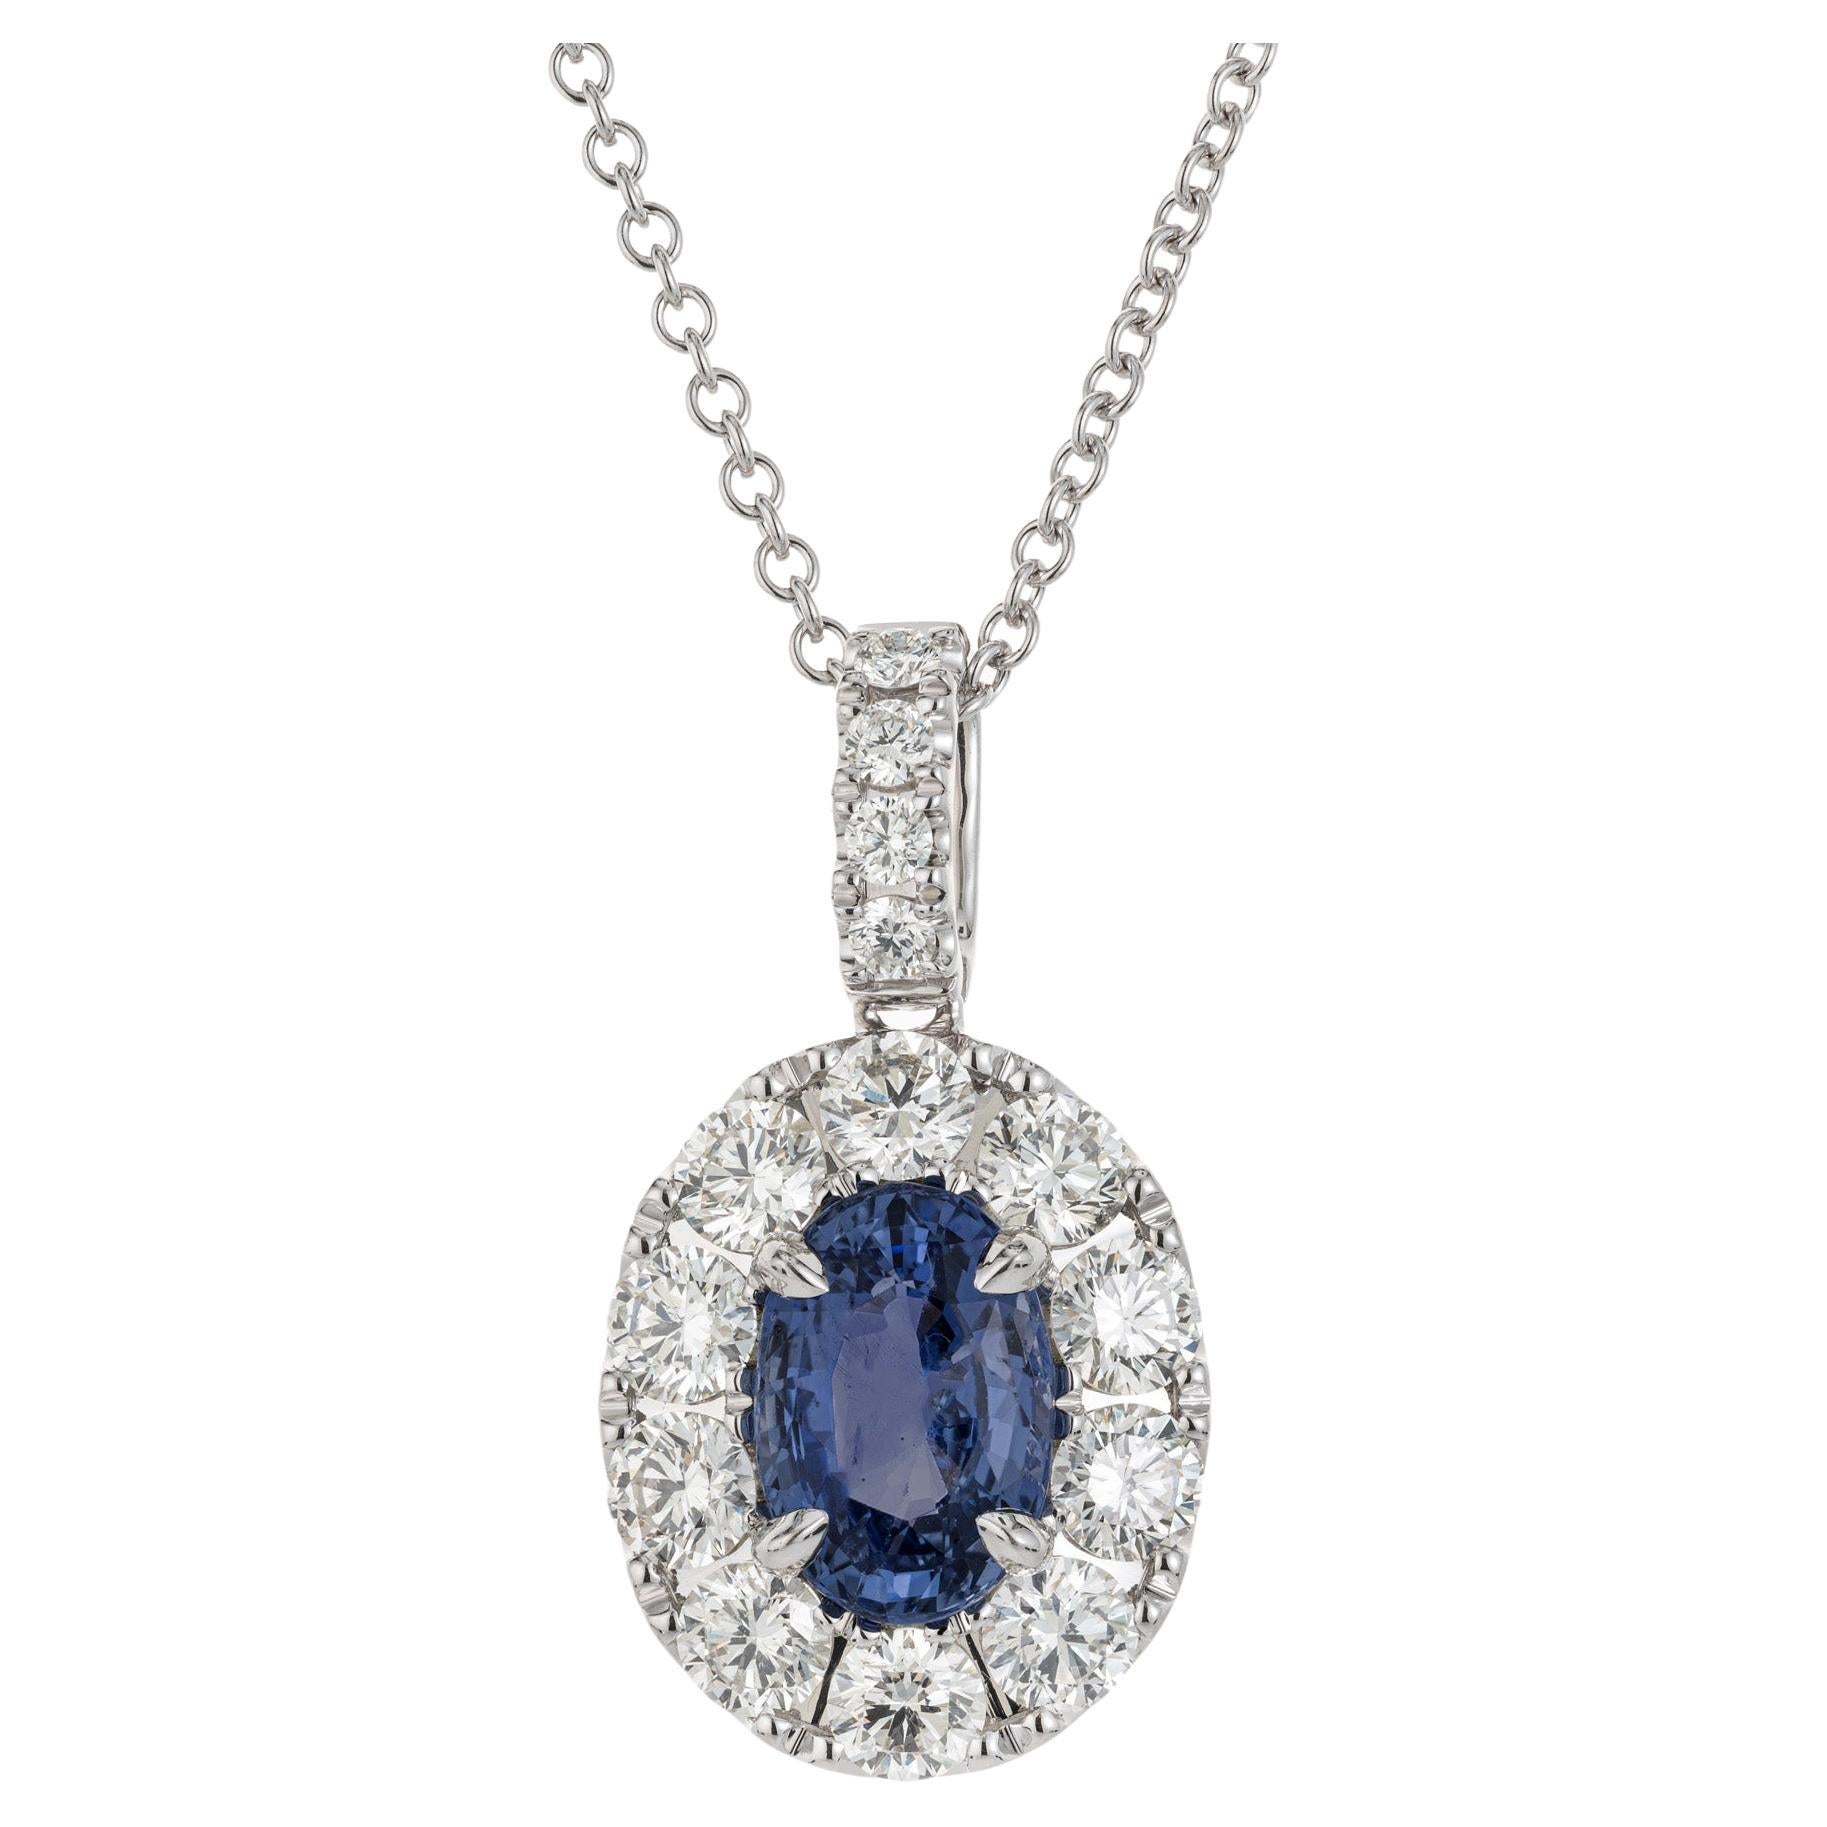 Peter Suchy GIA Certified 3.04 Carat Sapphire Diamond Gold Pendant Necklace